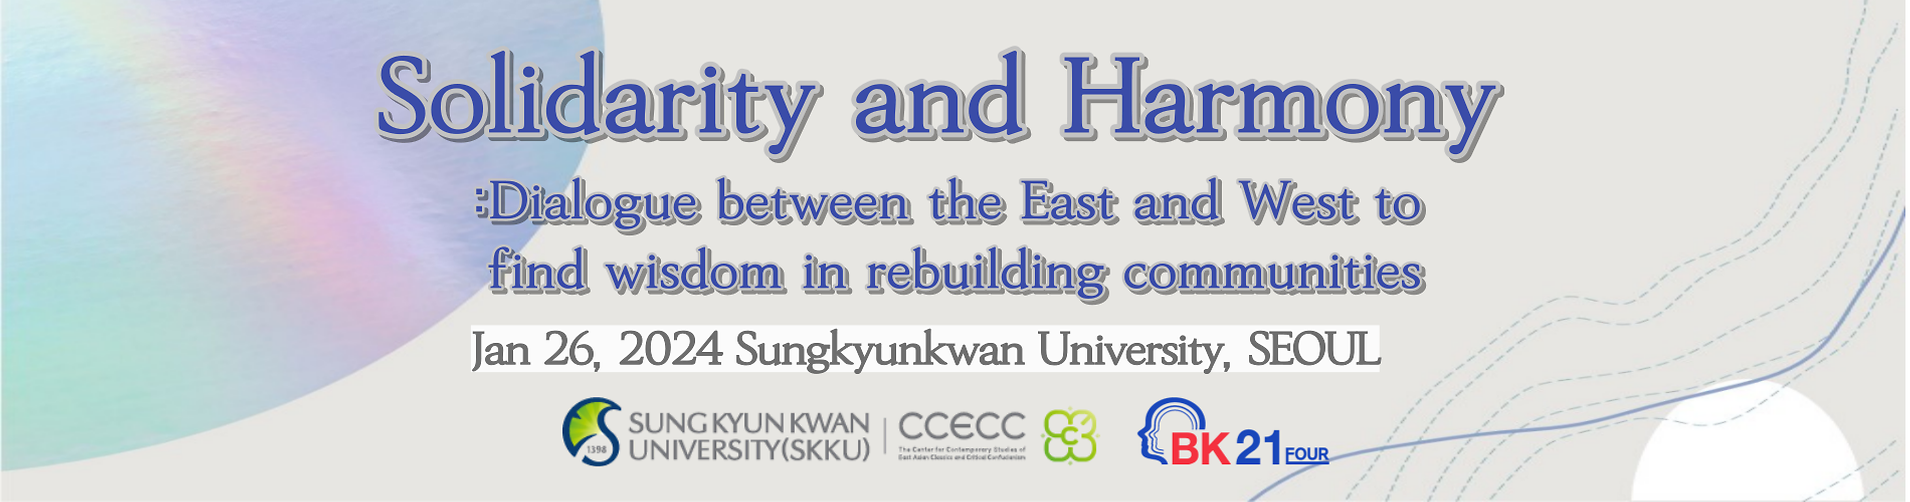 Solidarity and Harmony: Dialogue between the East and West to find wisdom in rebuilding communities